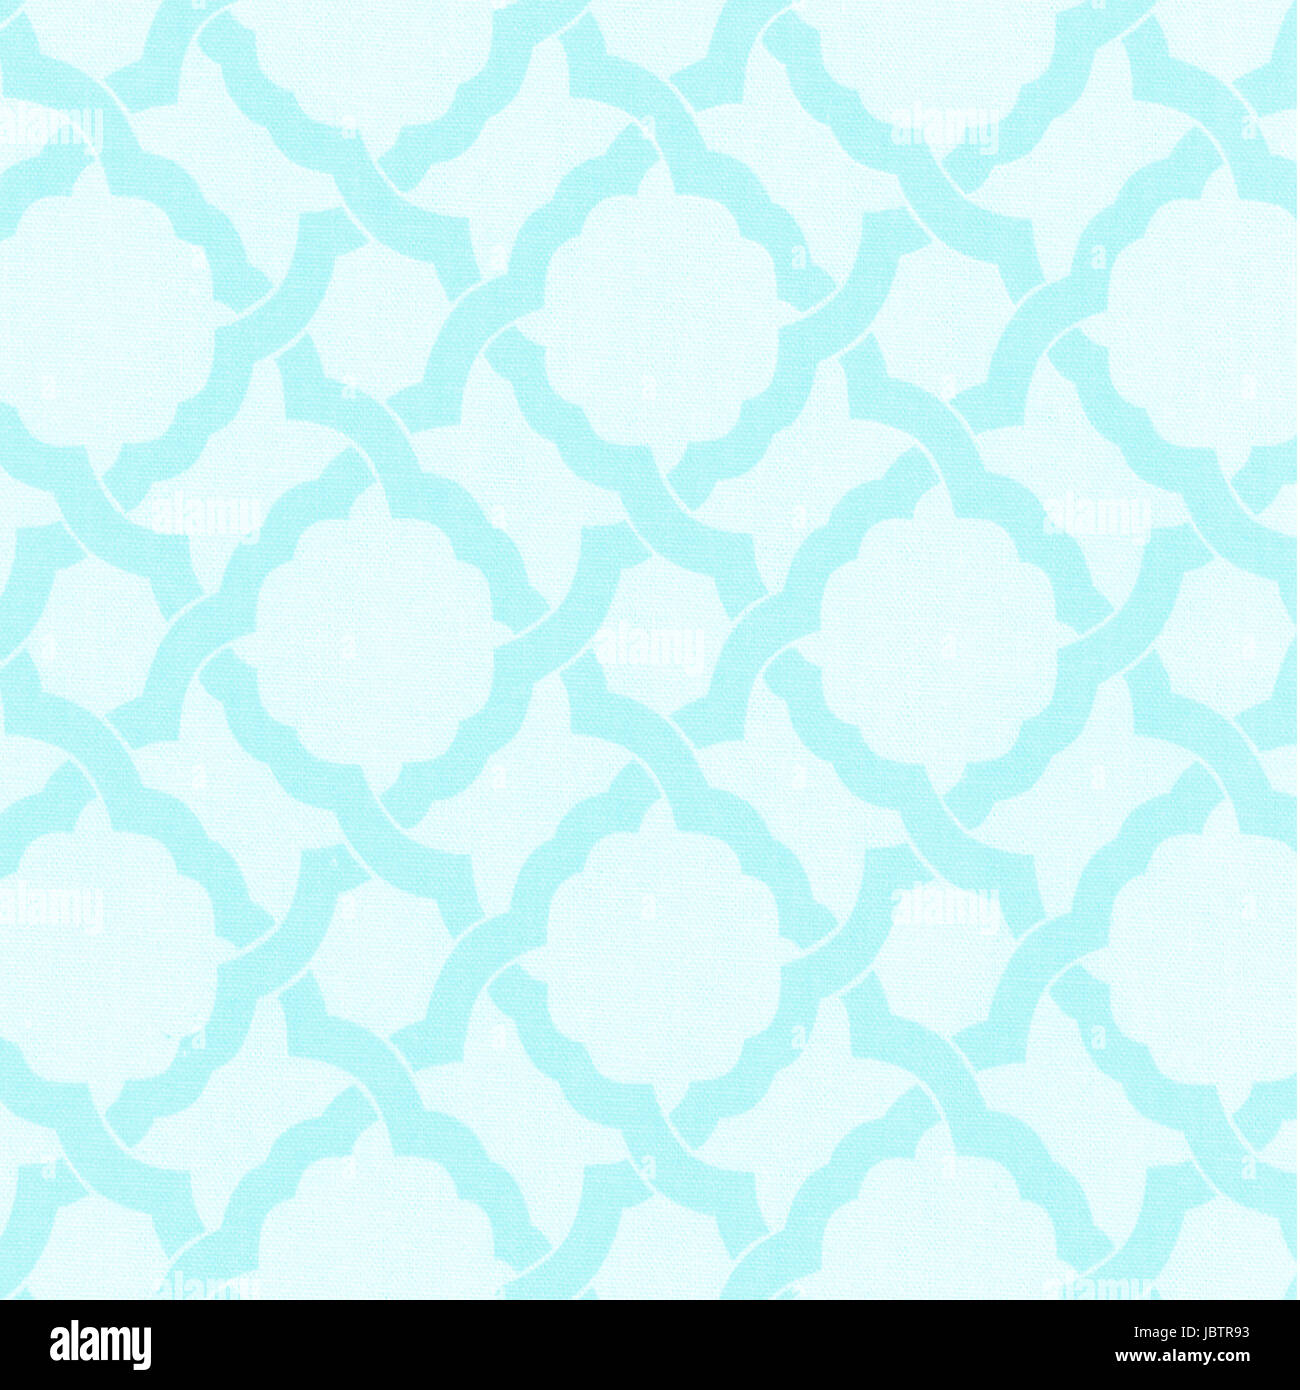 textile pattern on a light color background Stock Photo